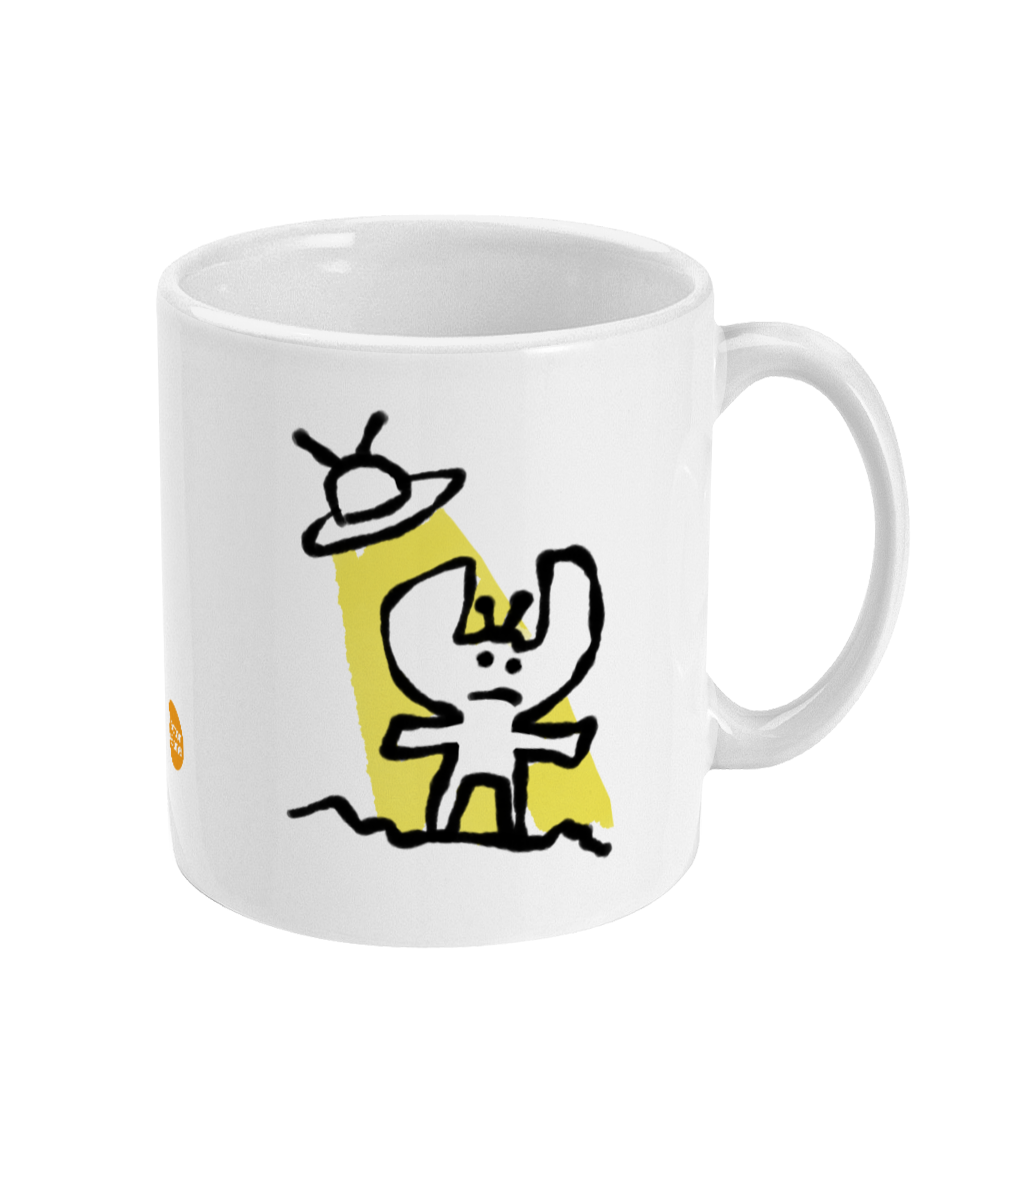 Cute Alien design coffee mug by Hector and Bone Right View